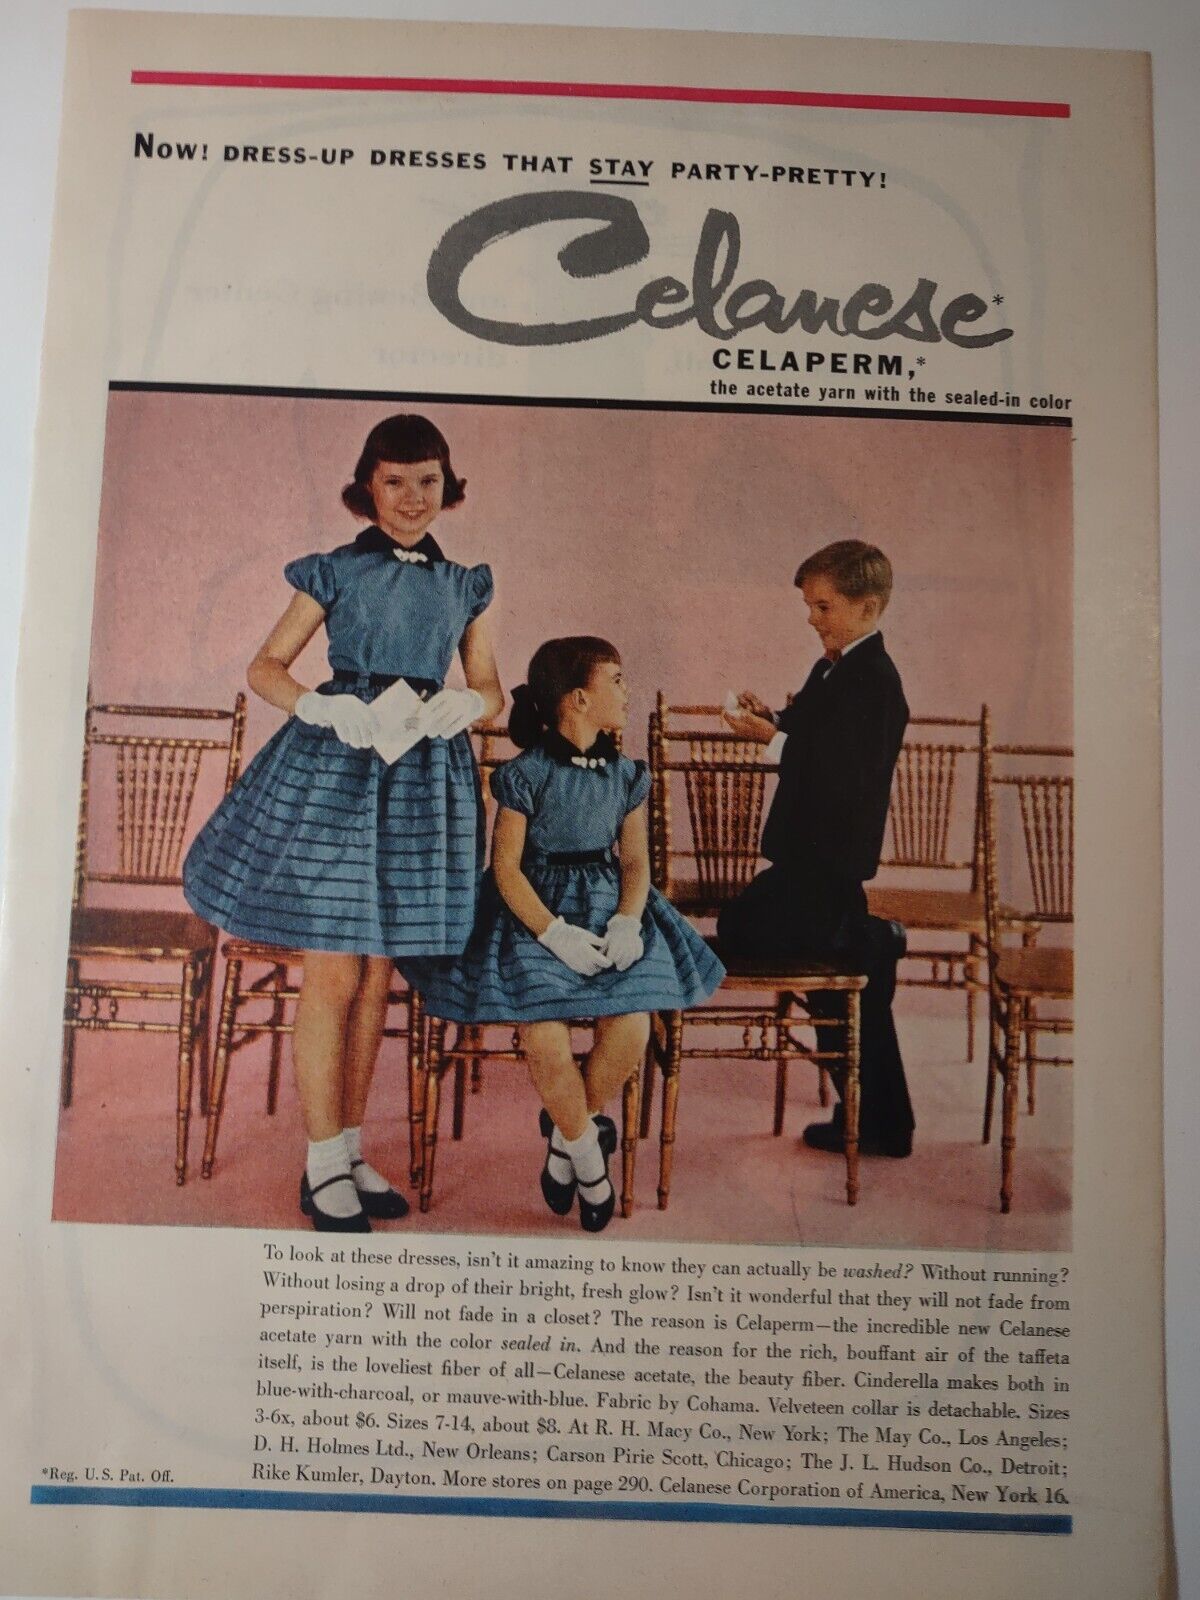 Celanese Dress Up Dresses That Stay Party Pretty Vintage 1950s Print Ad